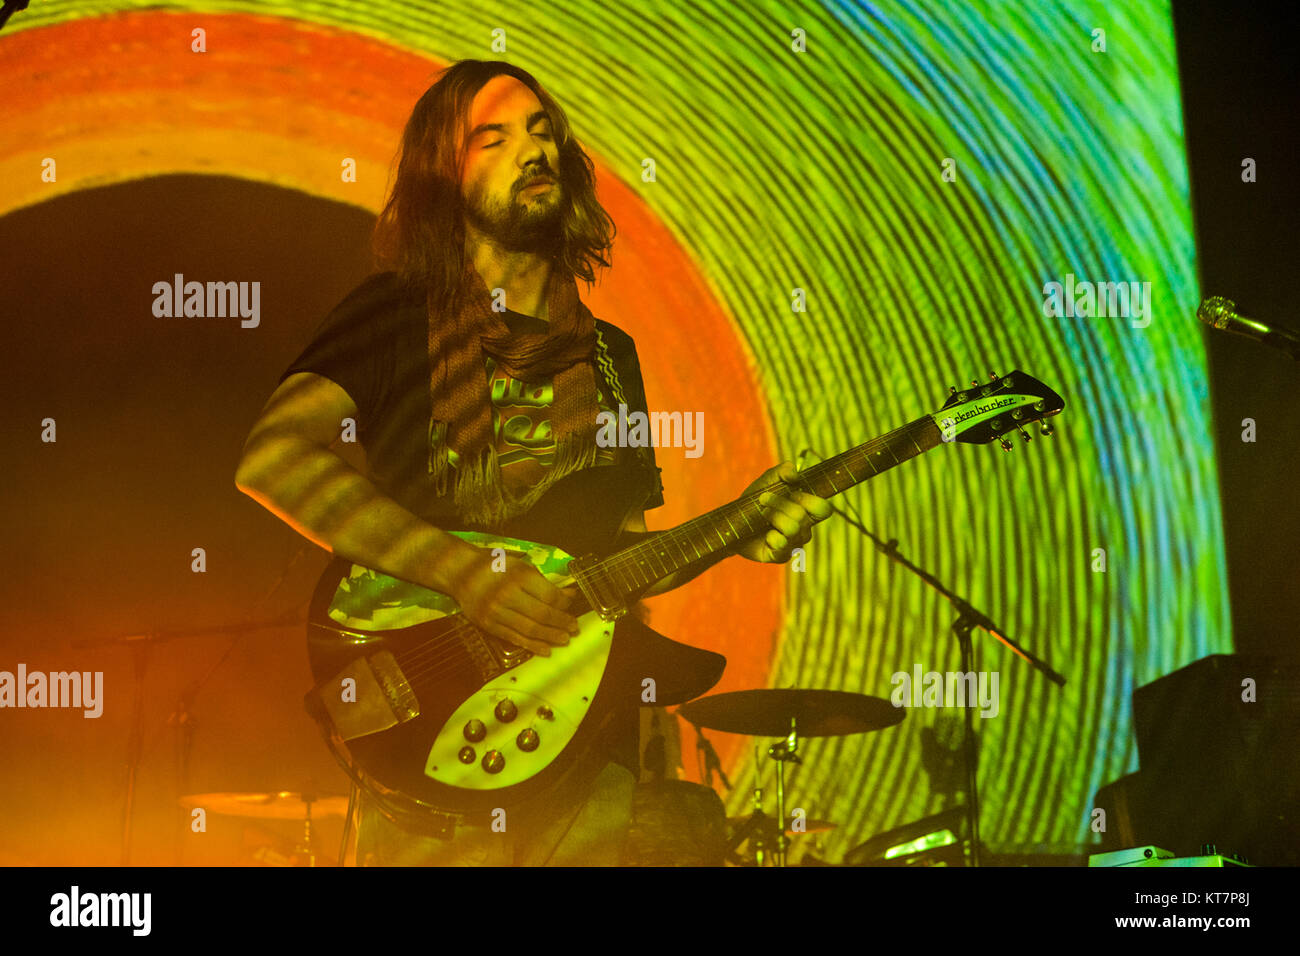 The Australian musical project Tame Impala performs a live concert at Sentrum Scene in Oslo. Here guitarist and musician Kevin Parker is seen live on stage. Norway, 04/02 2016. Stock Photo